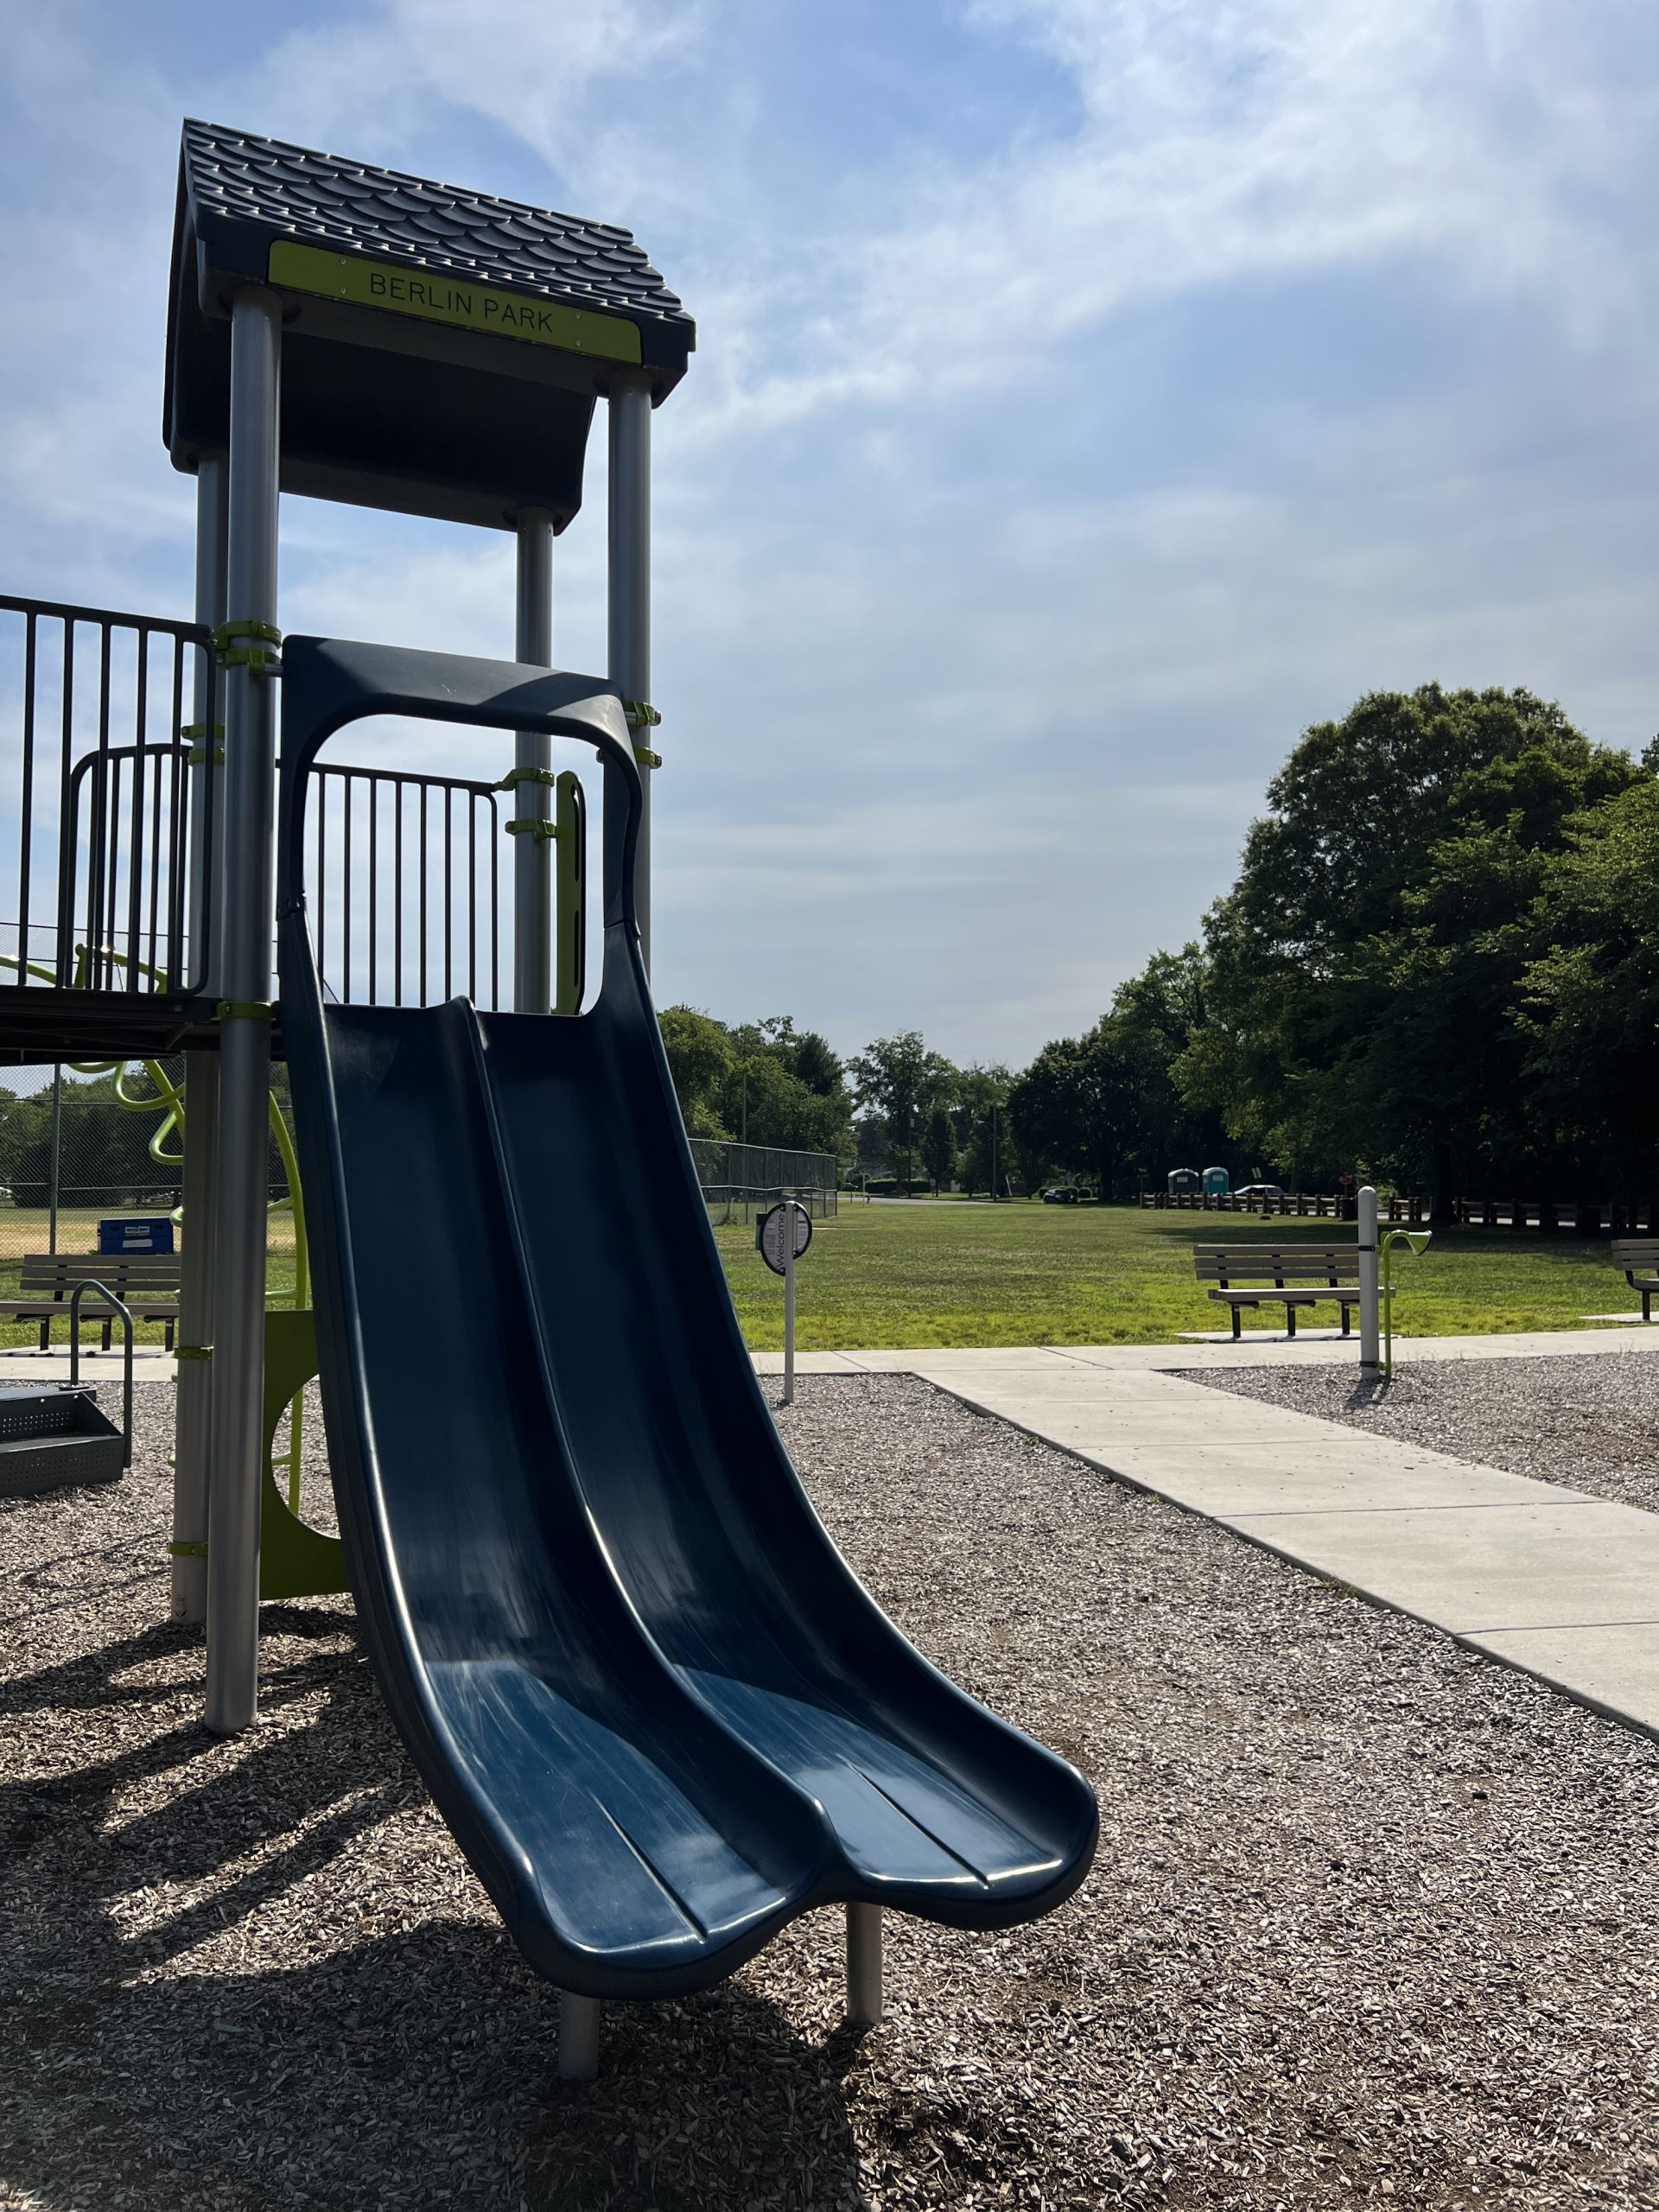 Larger Playground at Berlin Park Playgrounds in Berlin New Jersey blue side by side slide